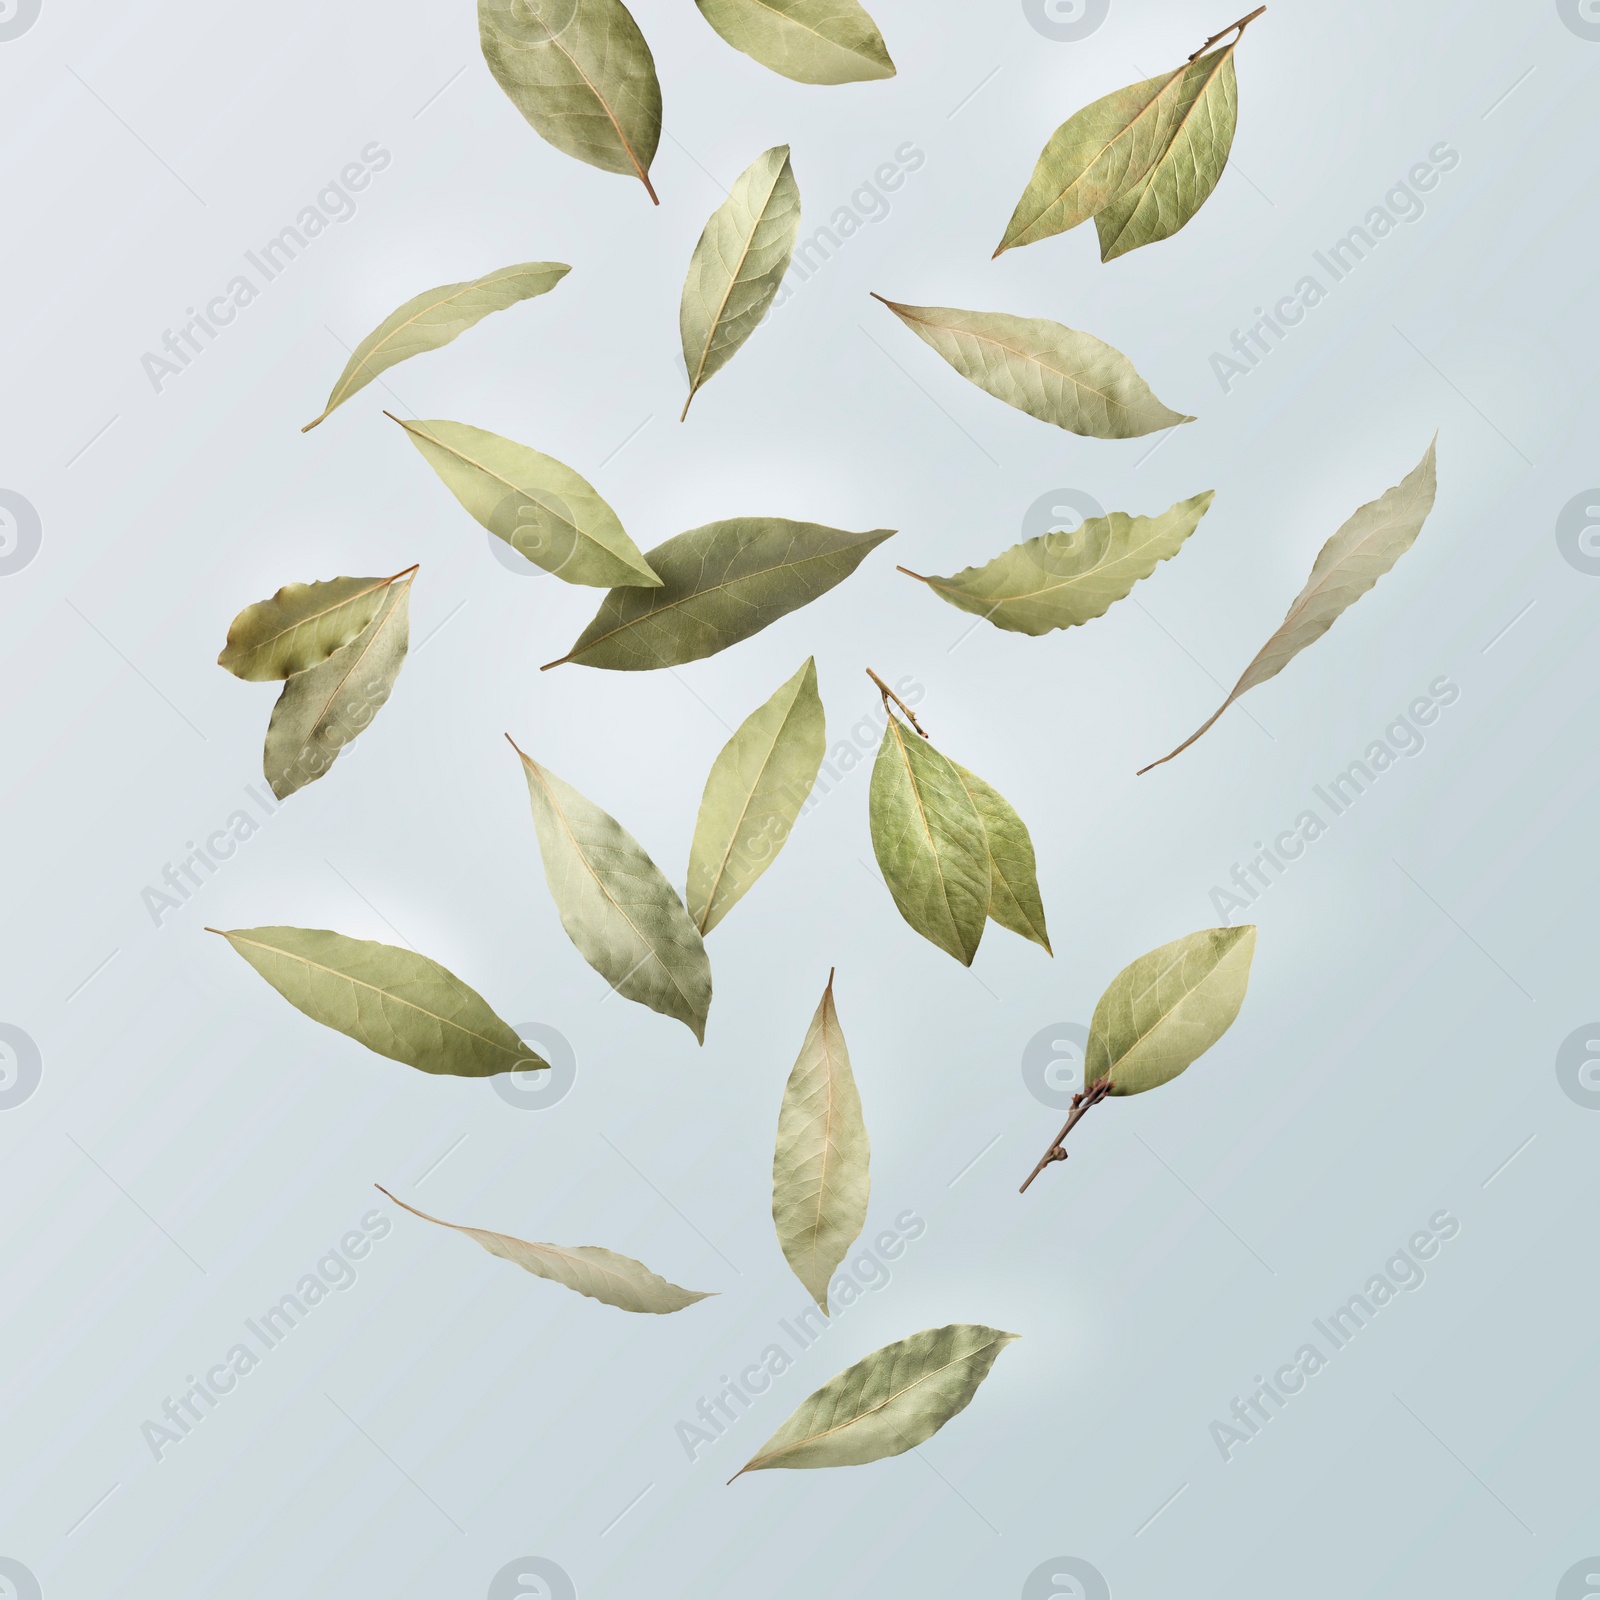 Image of Dry bay leaves falling on pale light dusty blue background